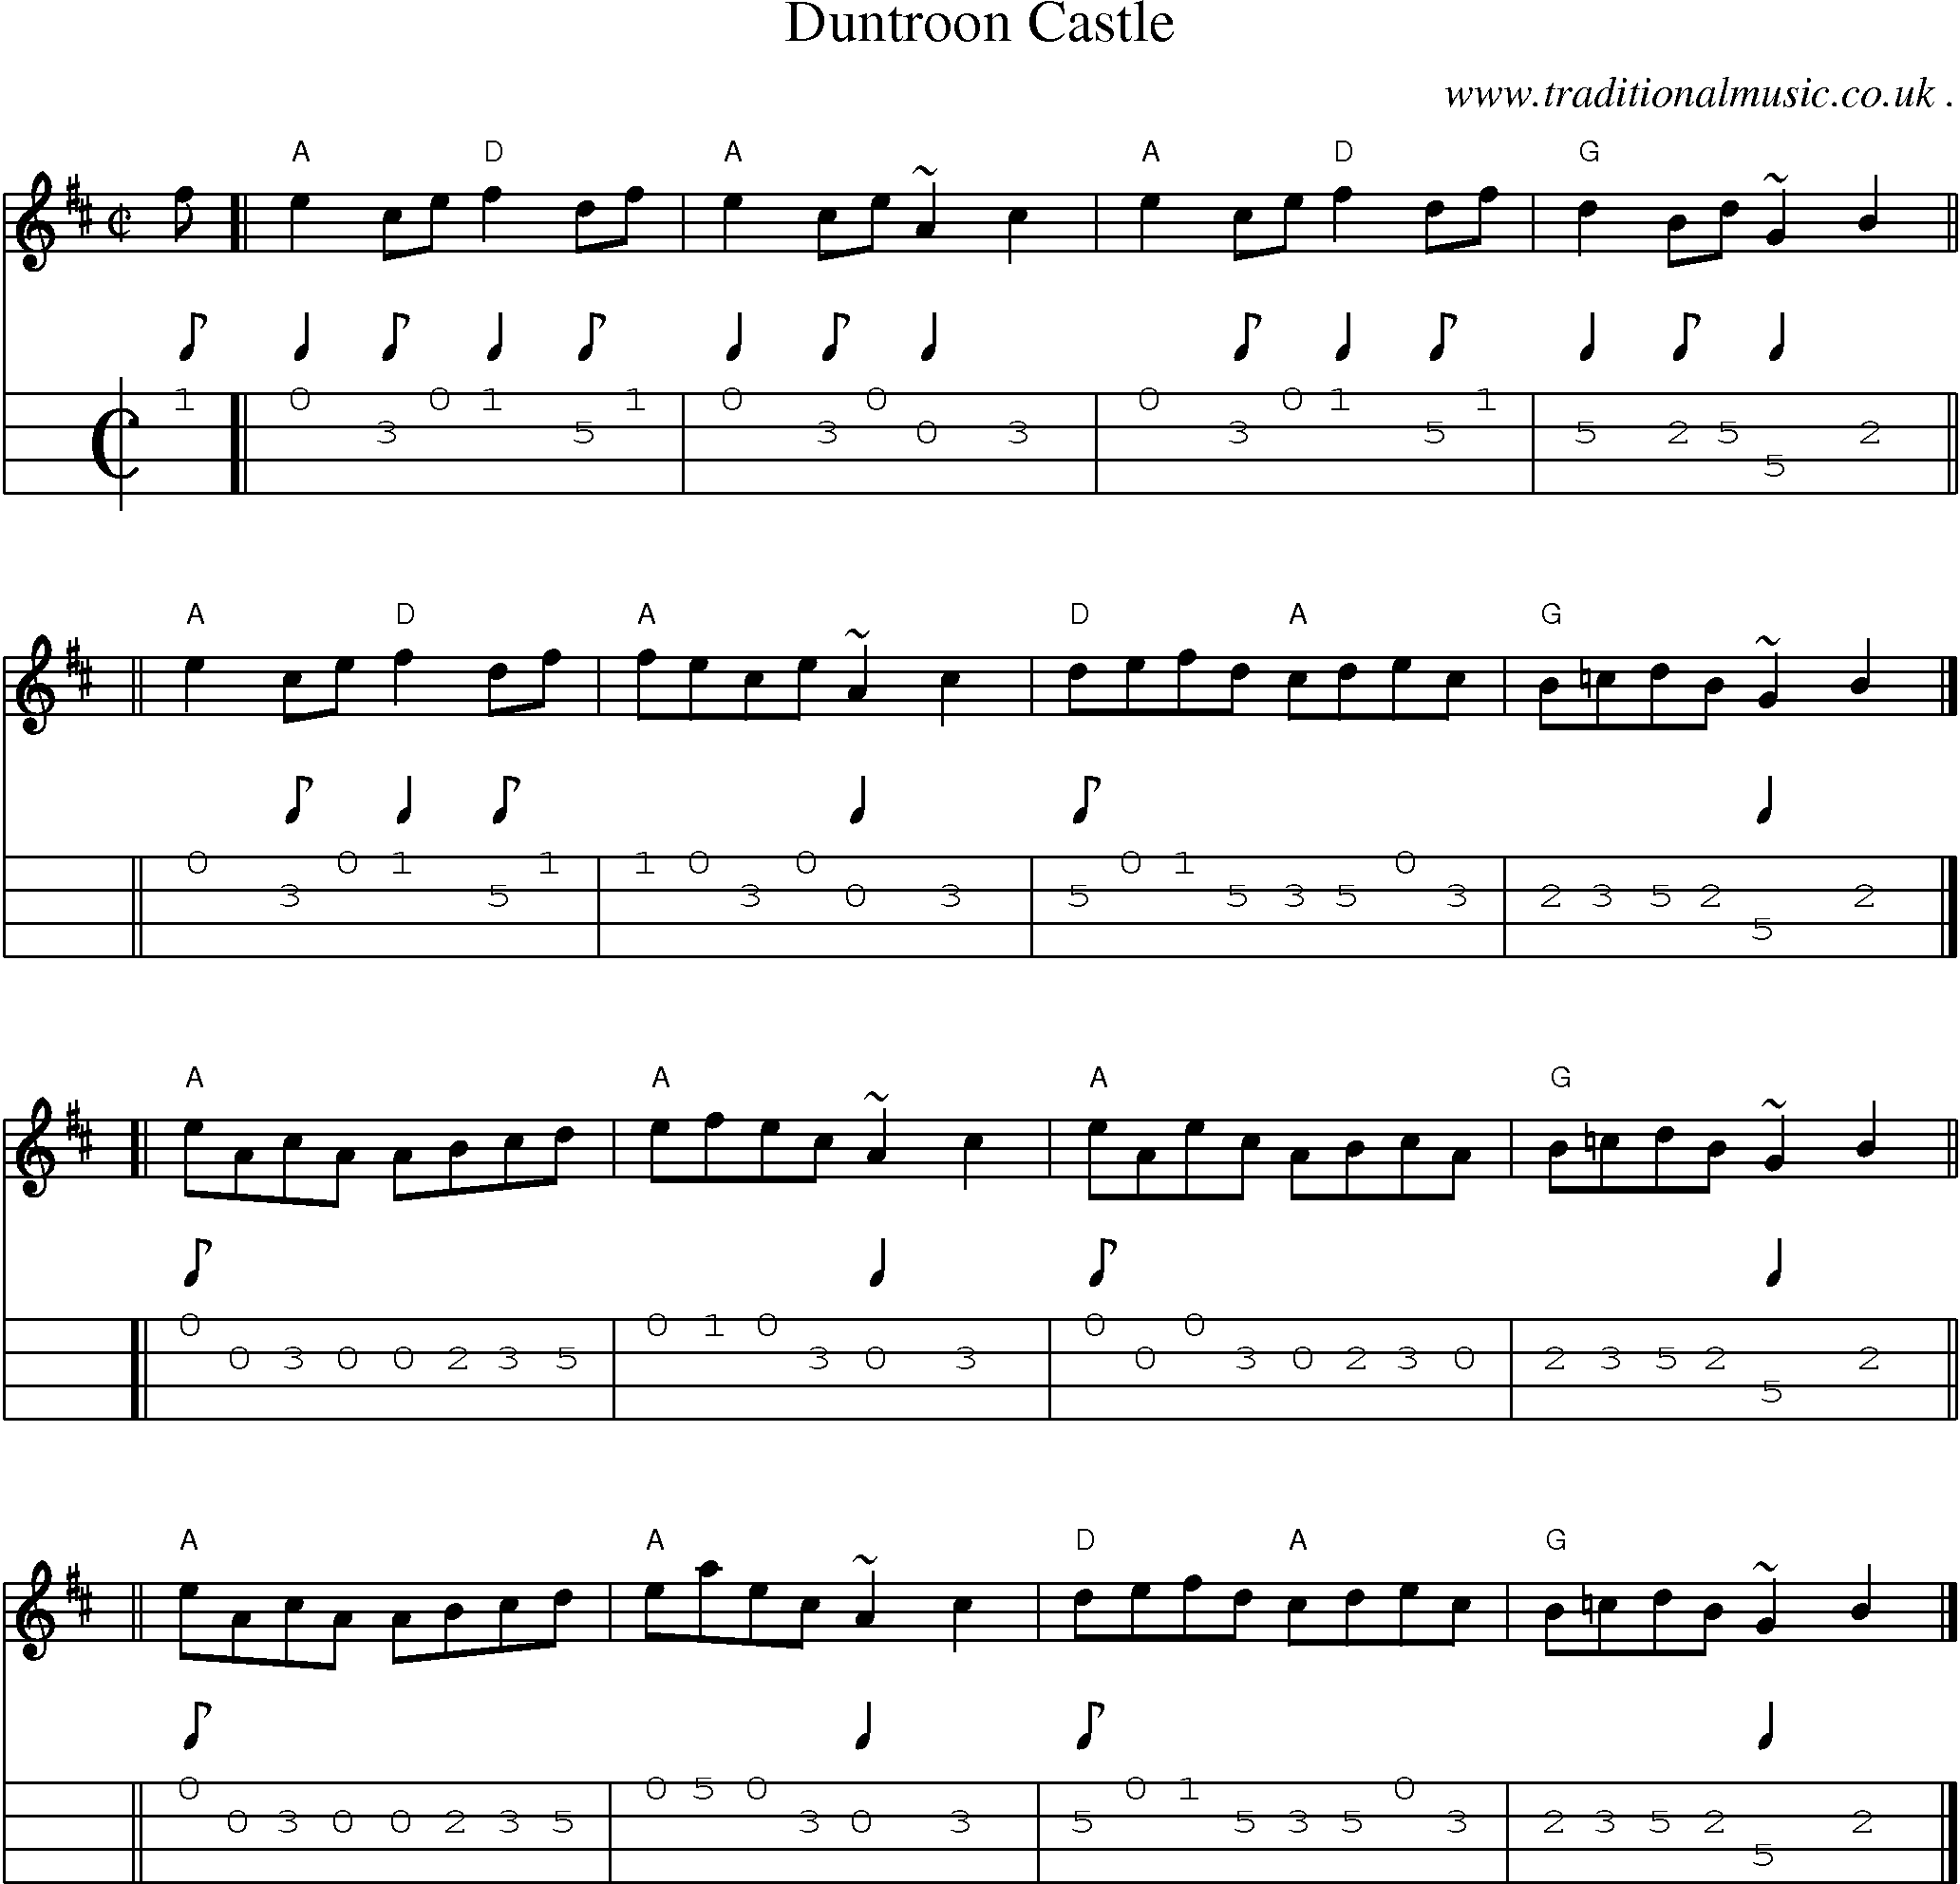 Sheet-music  score, Chords and Mandolin Tabs for Duntroon Castle